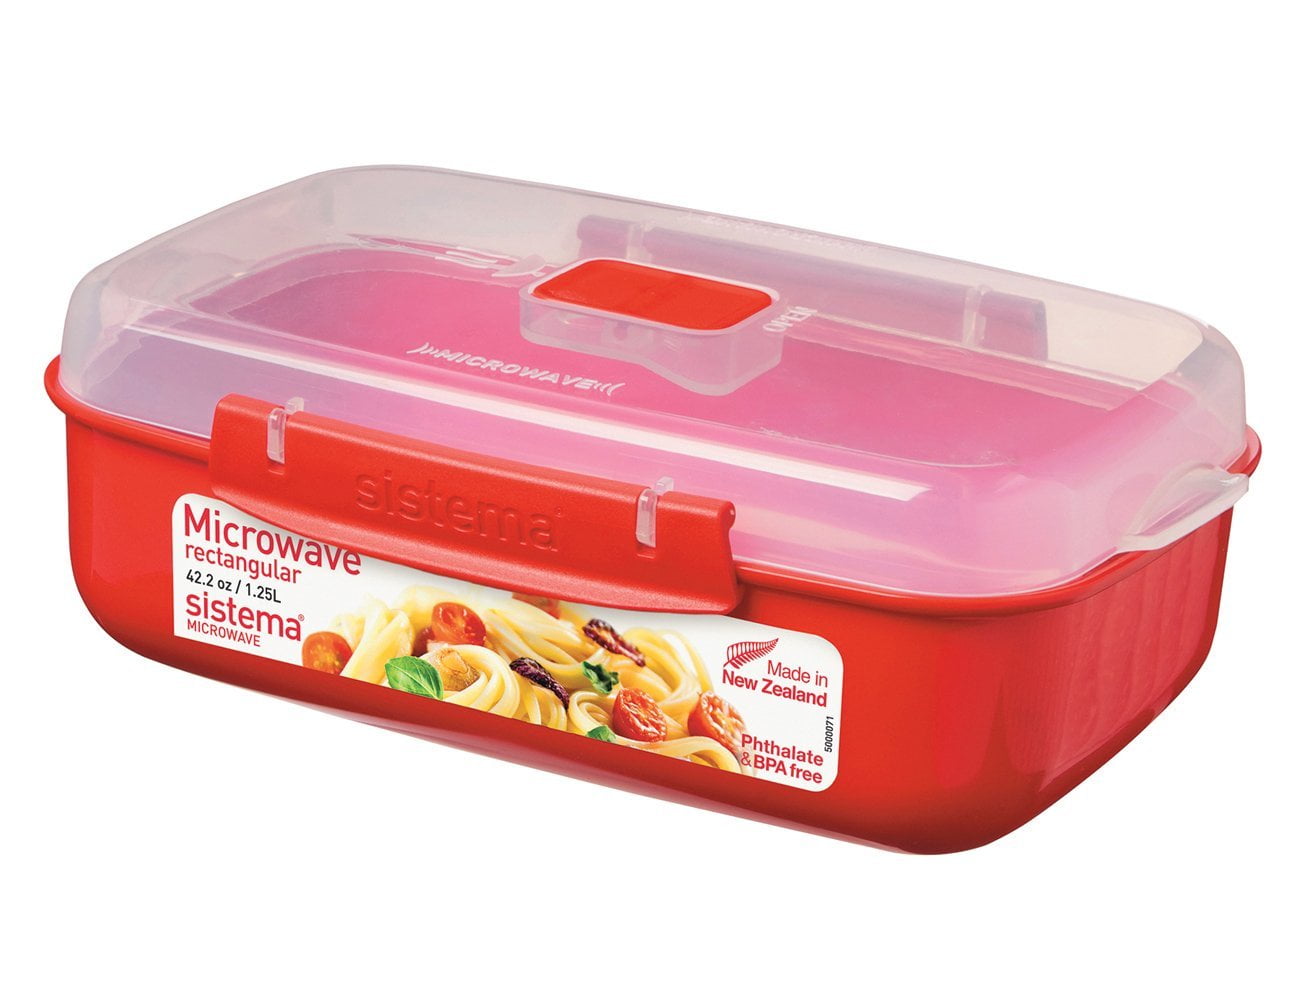 Sistema Snack Attack To Go Snack and Dip Container Pack 